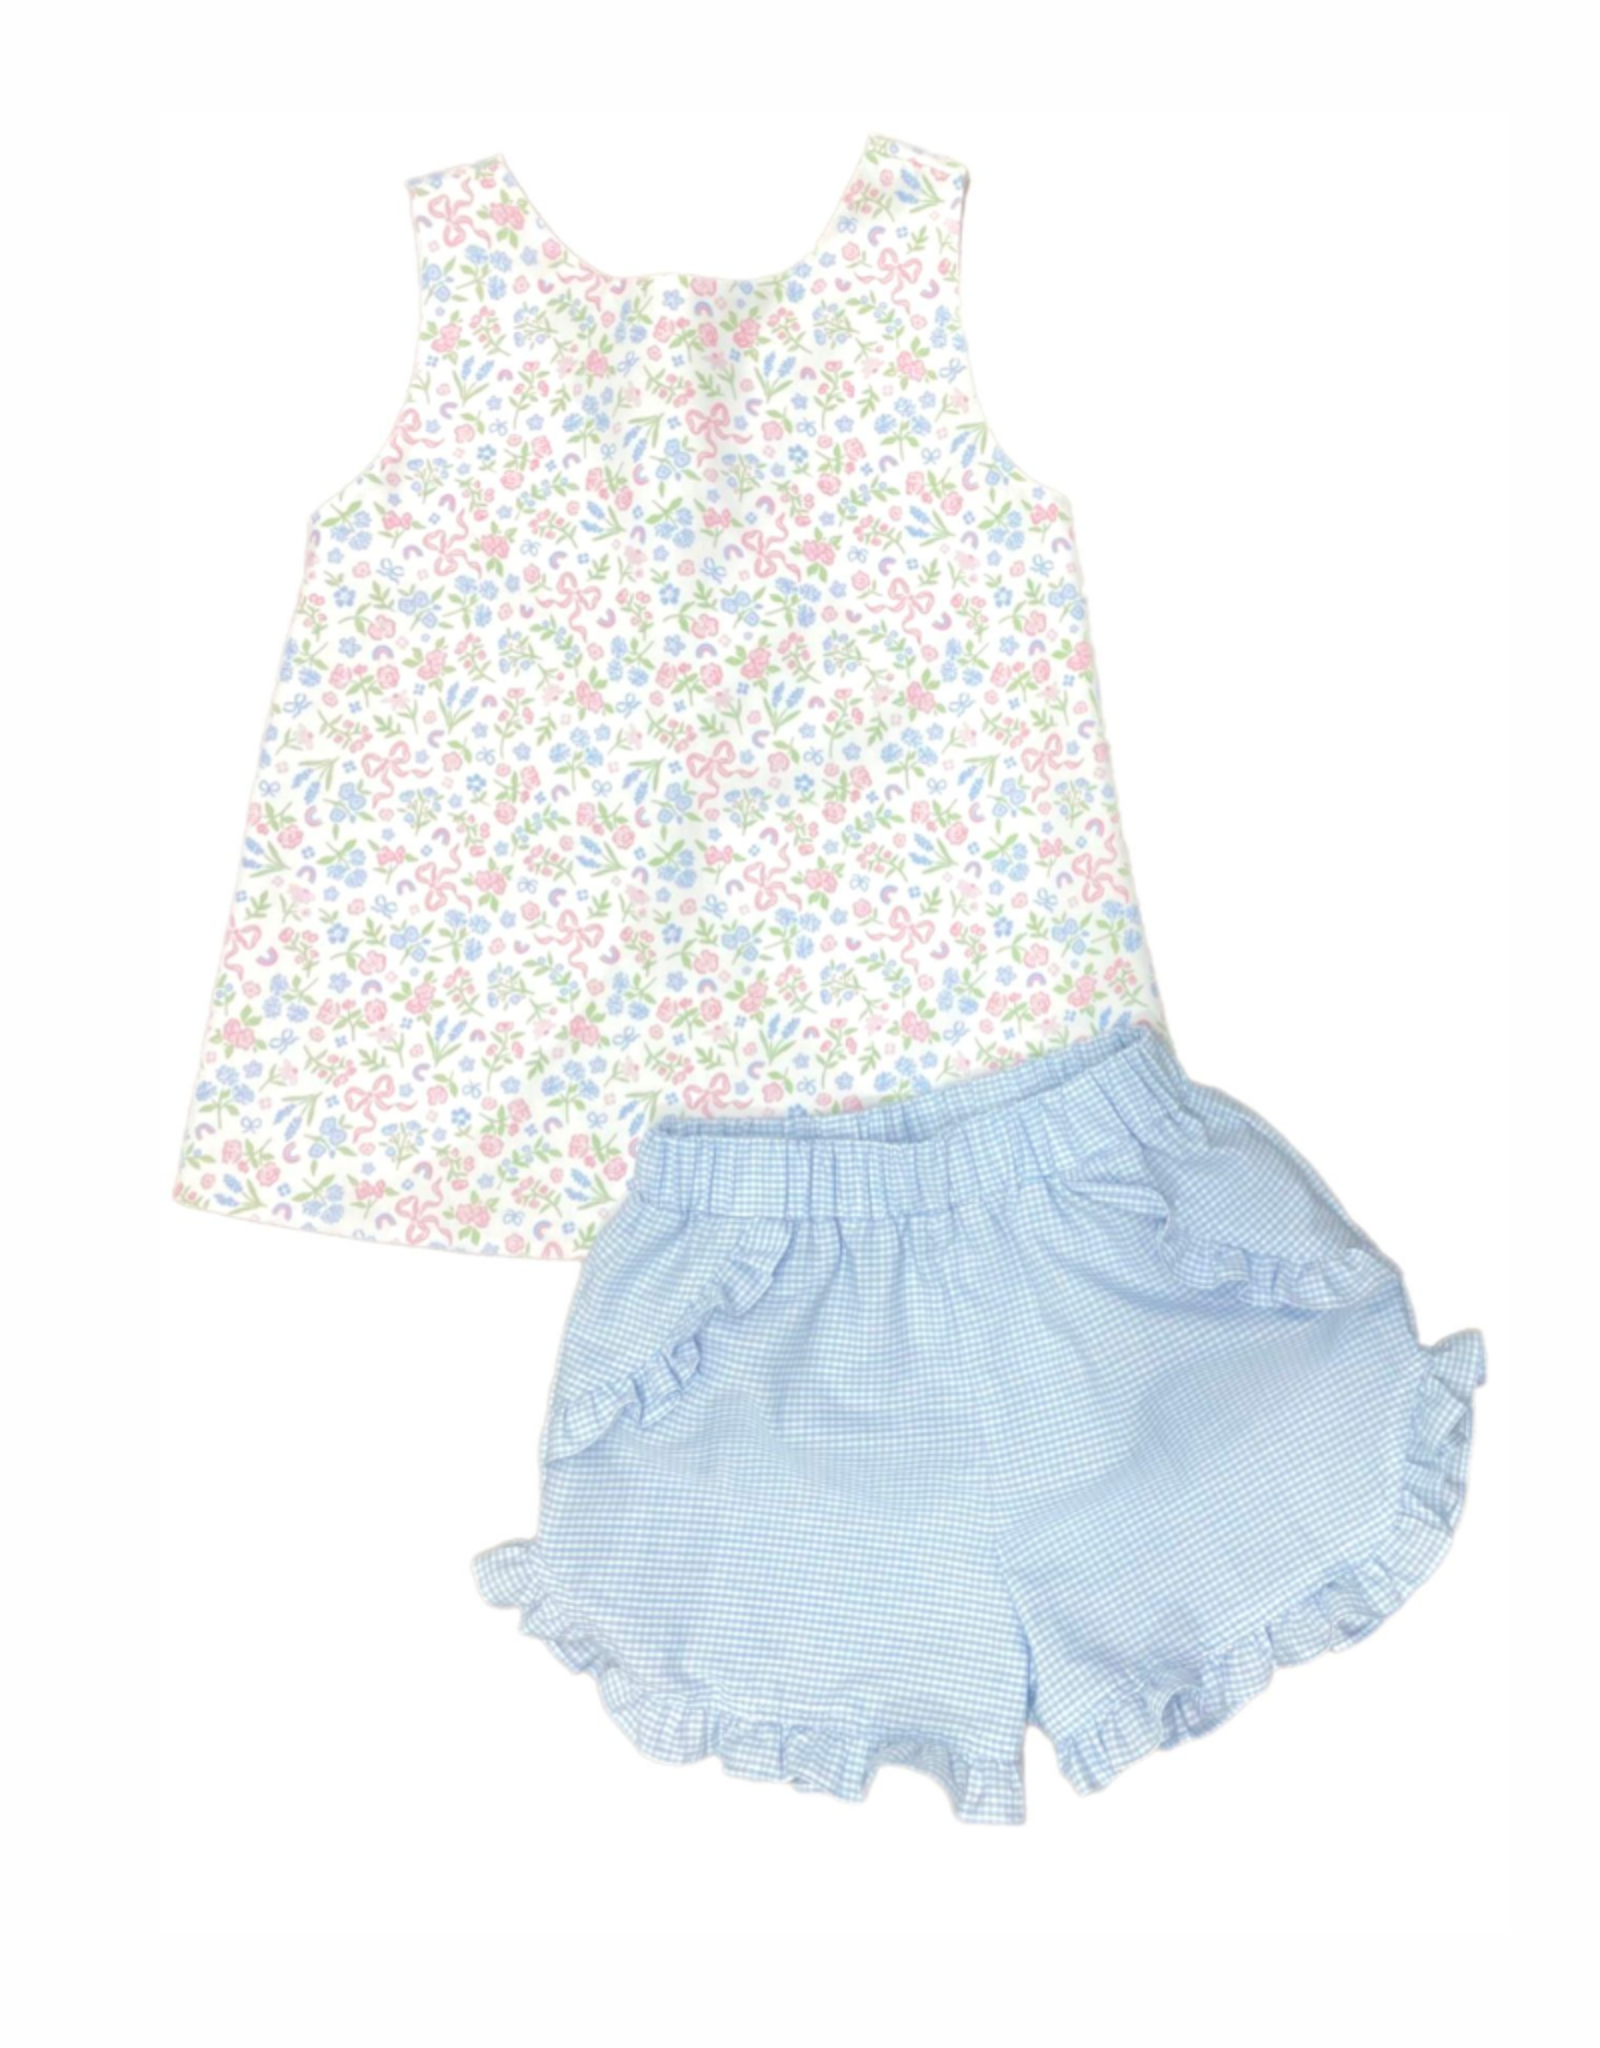 James and Lottie Blossoms and Bows Kinley Ruffled Short Set